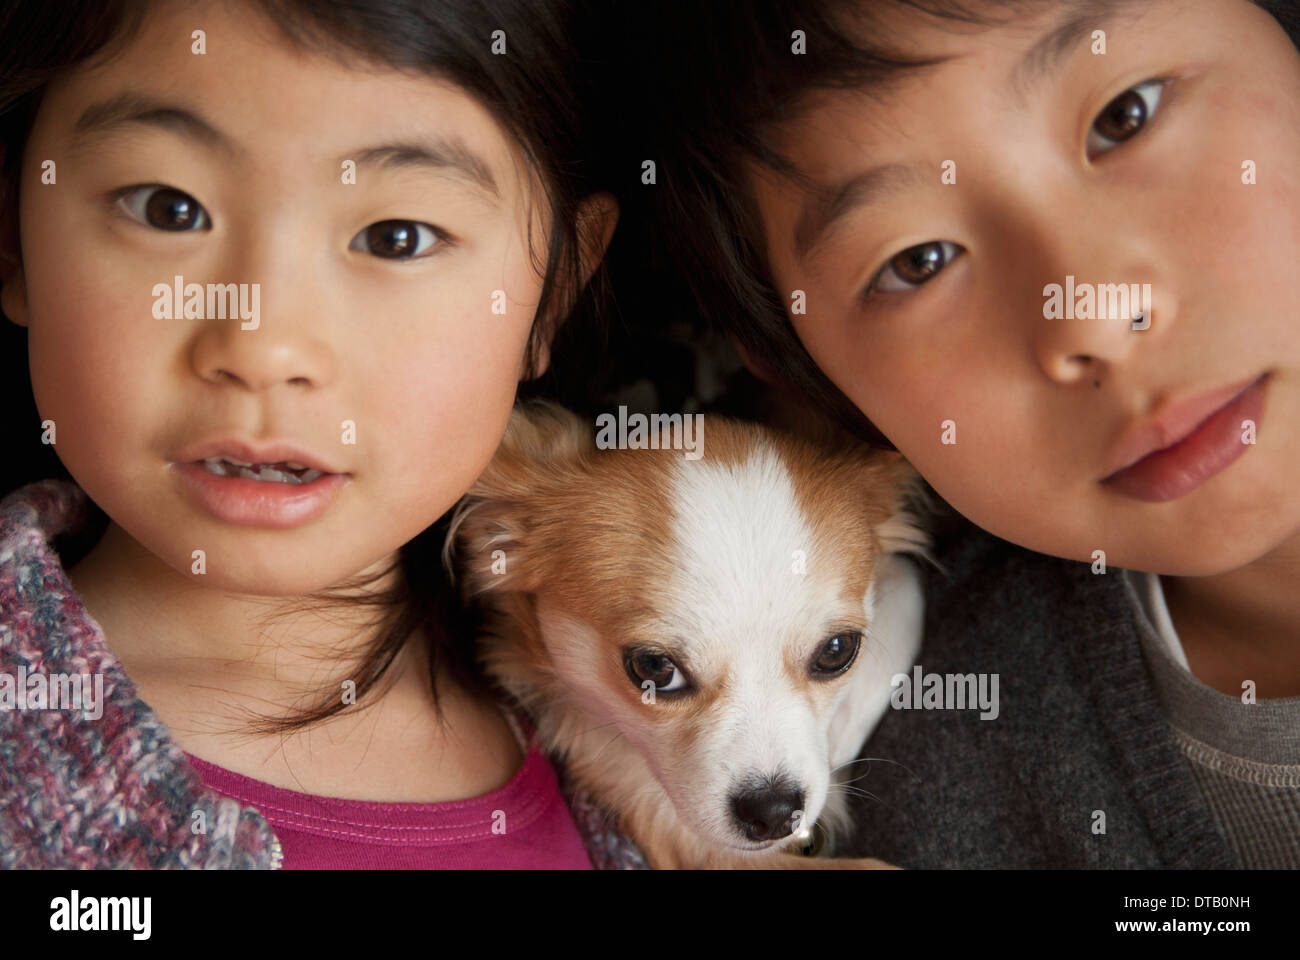 Boy and girl with dog, close-up Stock Photo